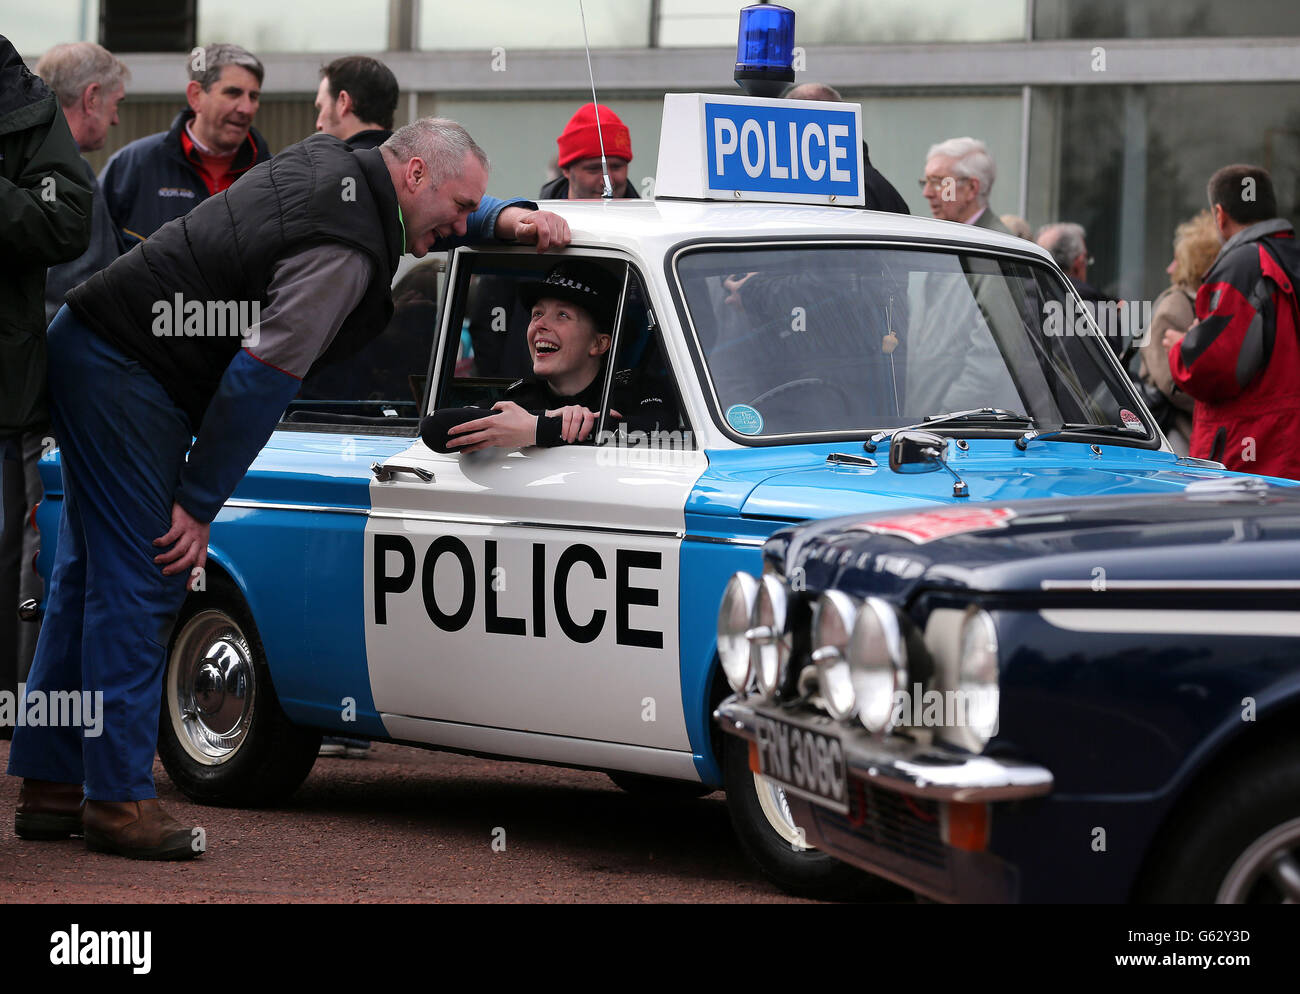 Car enthusiast Robert Napier from Newmains speaks with police officer Carrie-Ann McNab as she sits in a Hillman Imp police car as they prepare to leave by convoy the site of the former factory in Linwood to mark the 50th anniversary of the first Hillman Imp car made at the Rootes car plant. Stock Photo